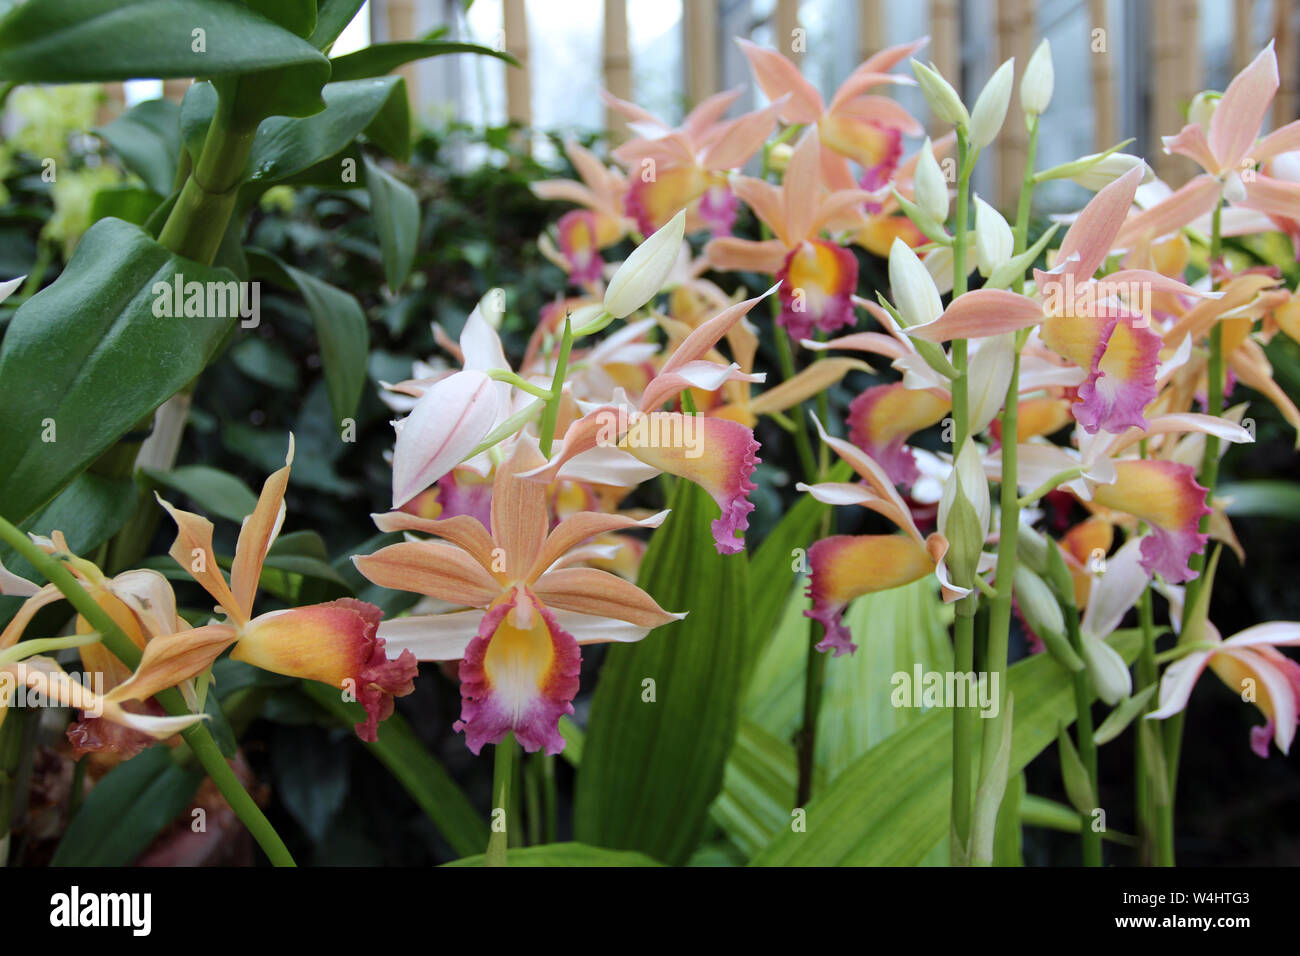 A group of blooming Phaius Dan Rosenberg Tropical Ice Orchids growing in a garden Stock Photo